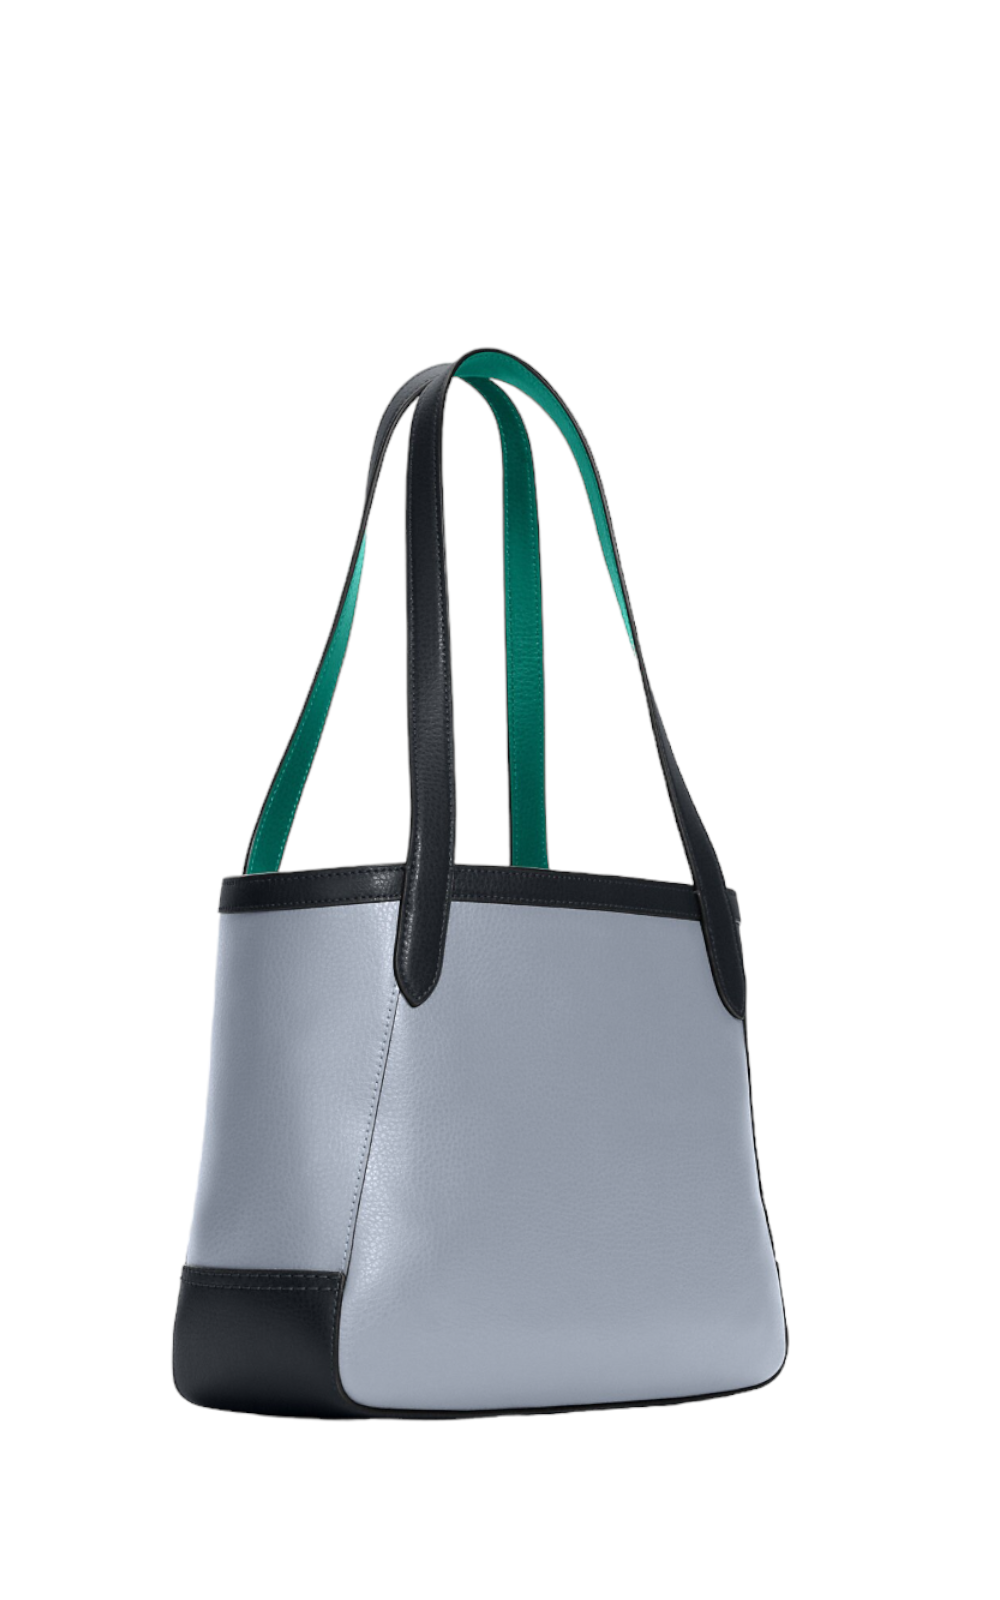 Coach Tote 27 In Colorblock With Horse And Carriage